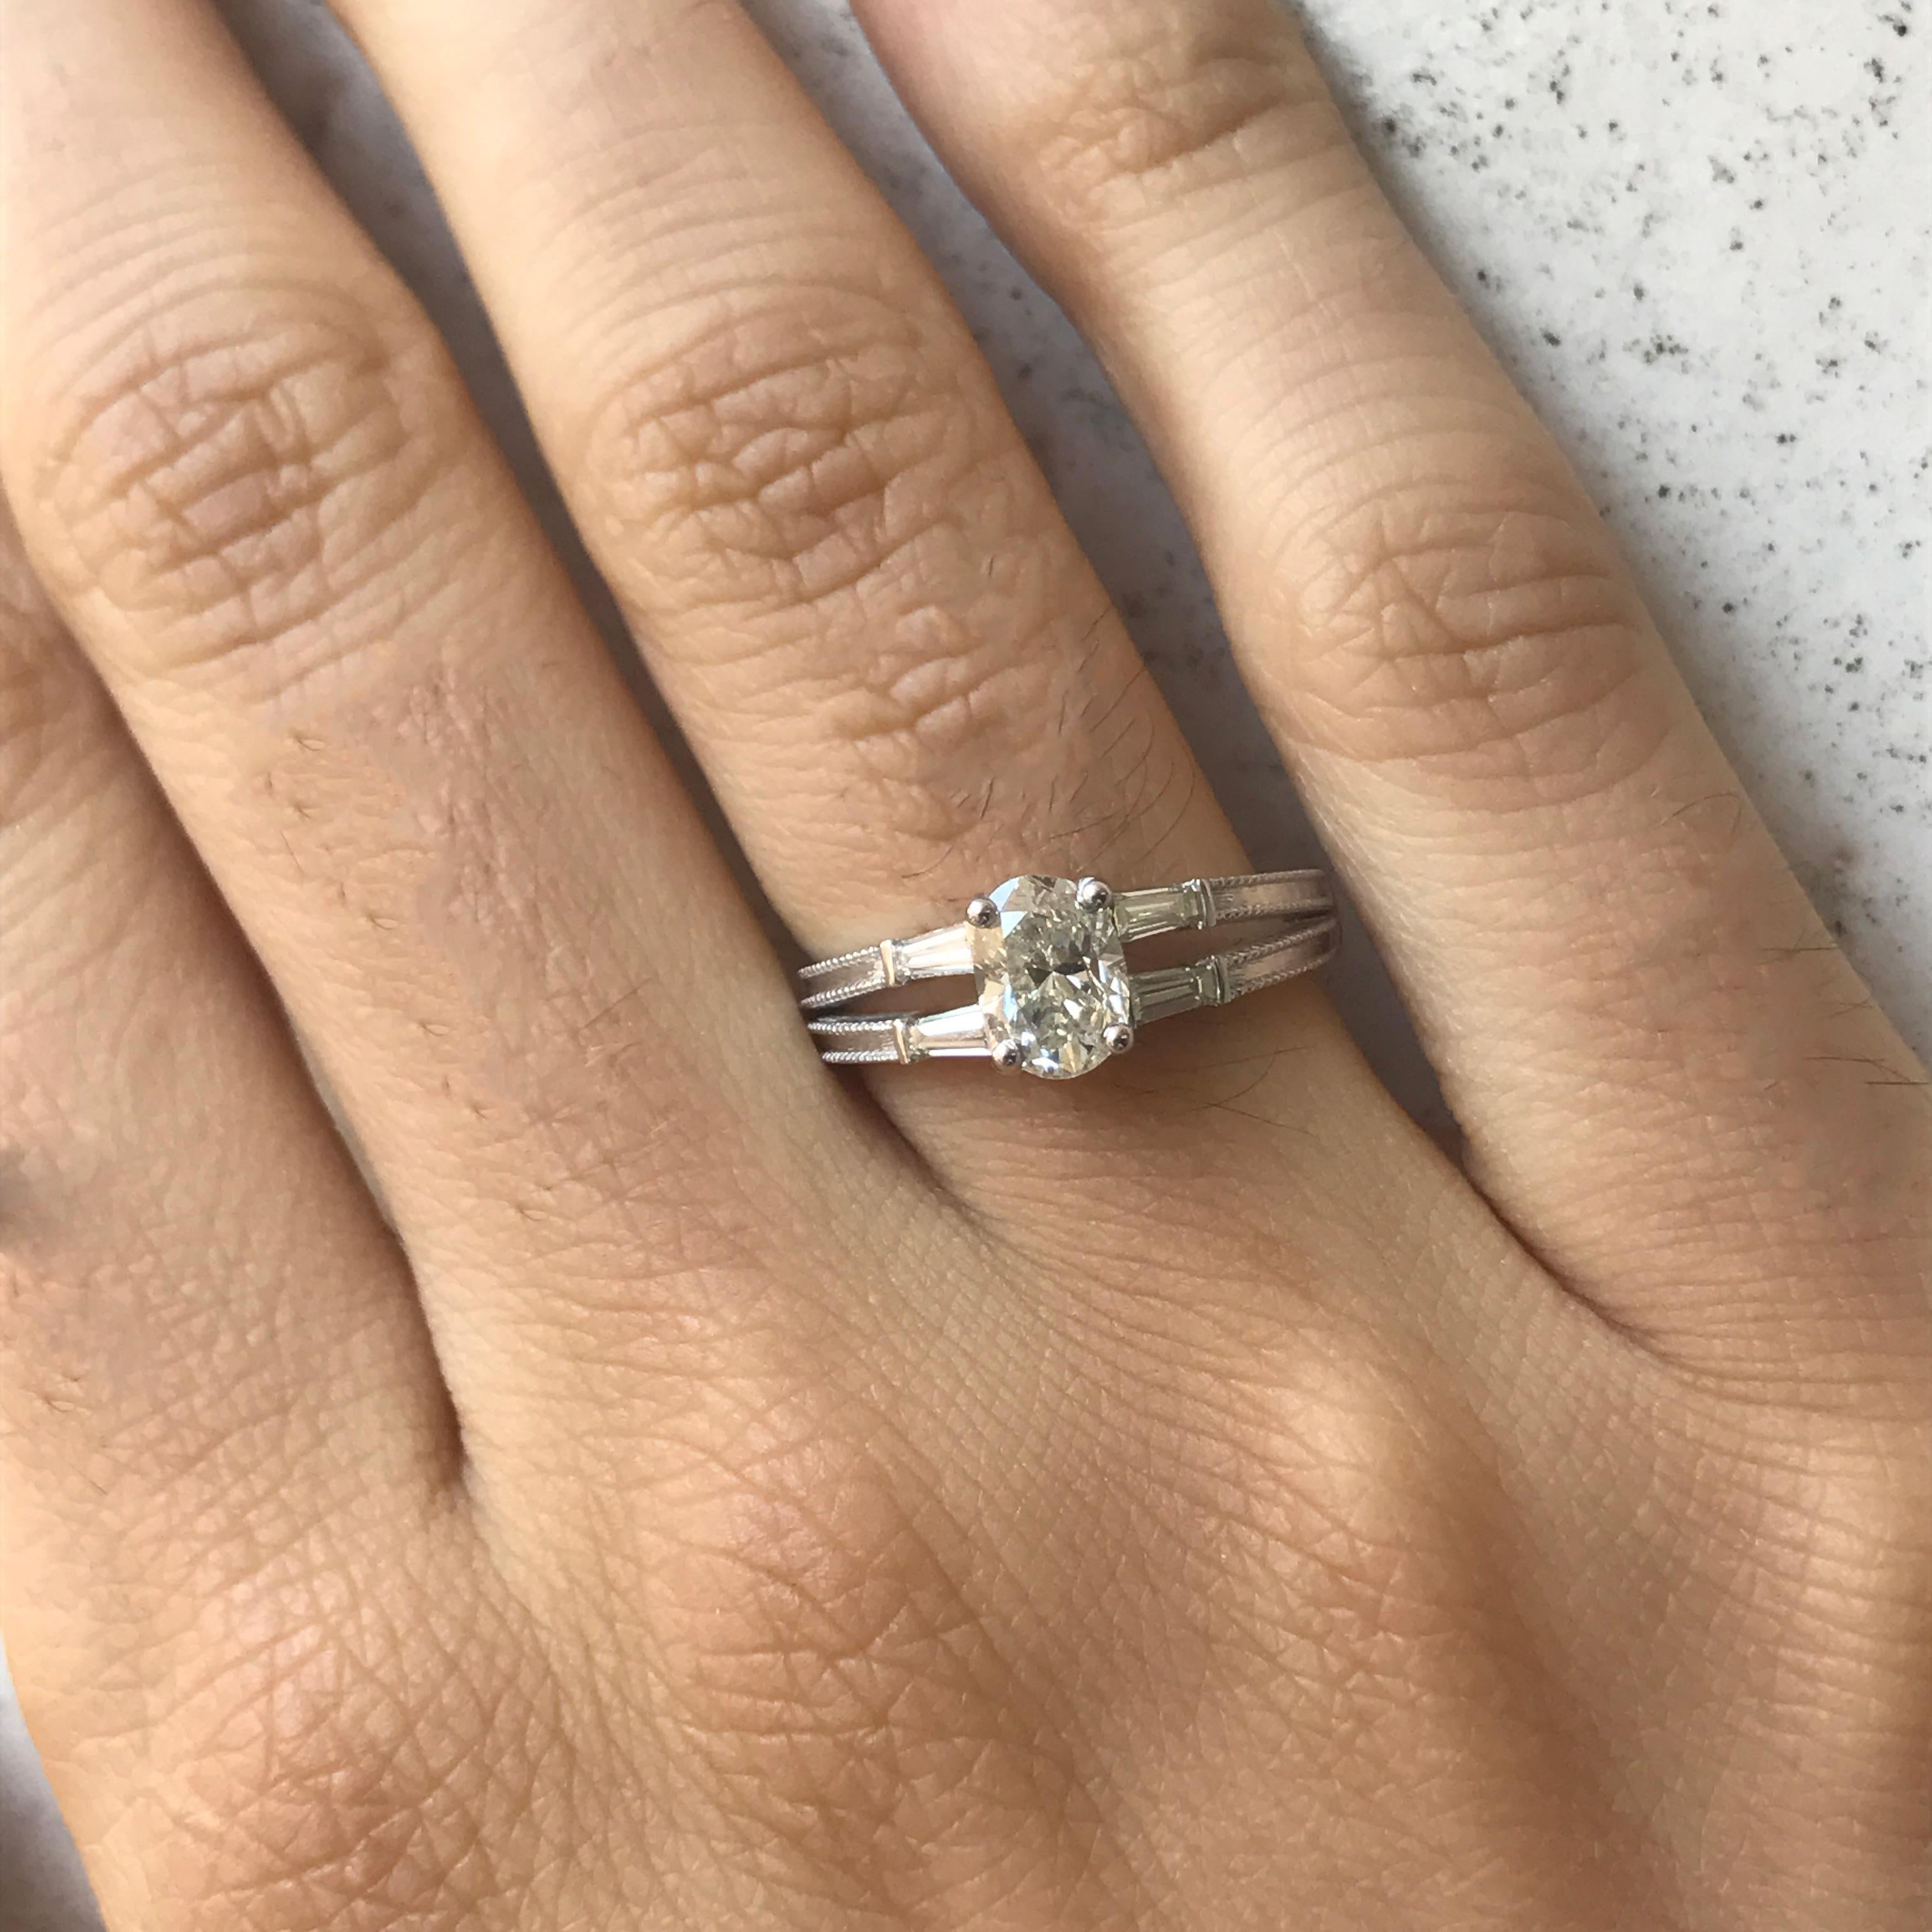 AS012-1922210

Ring will be made to order and can be purchased without the center stone. I can supply a different center stone to fit your budget if it is higher or lower. Will take approximately 3-6 business weeks.

Center Stone Diamond Details :